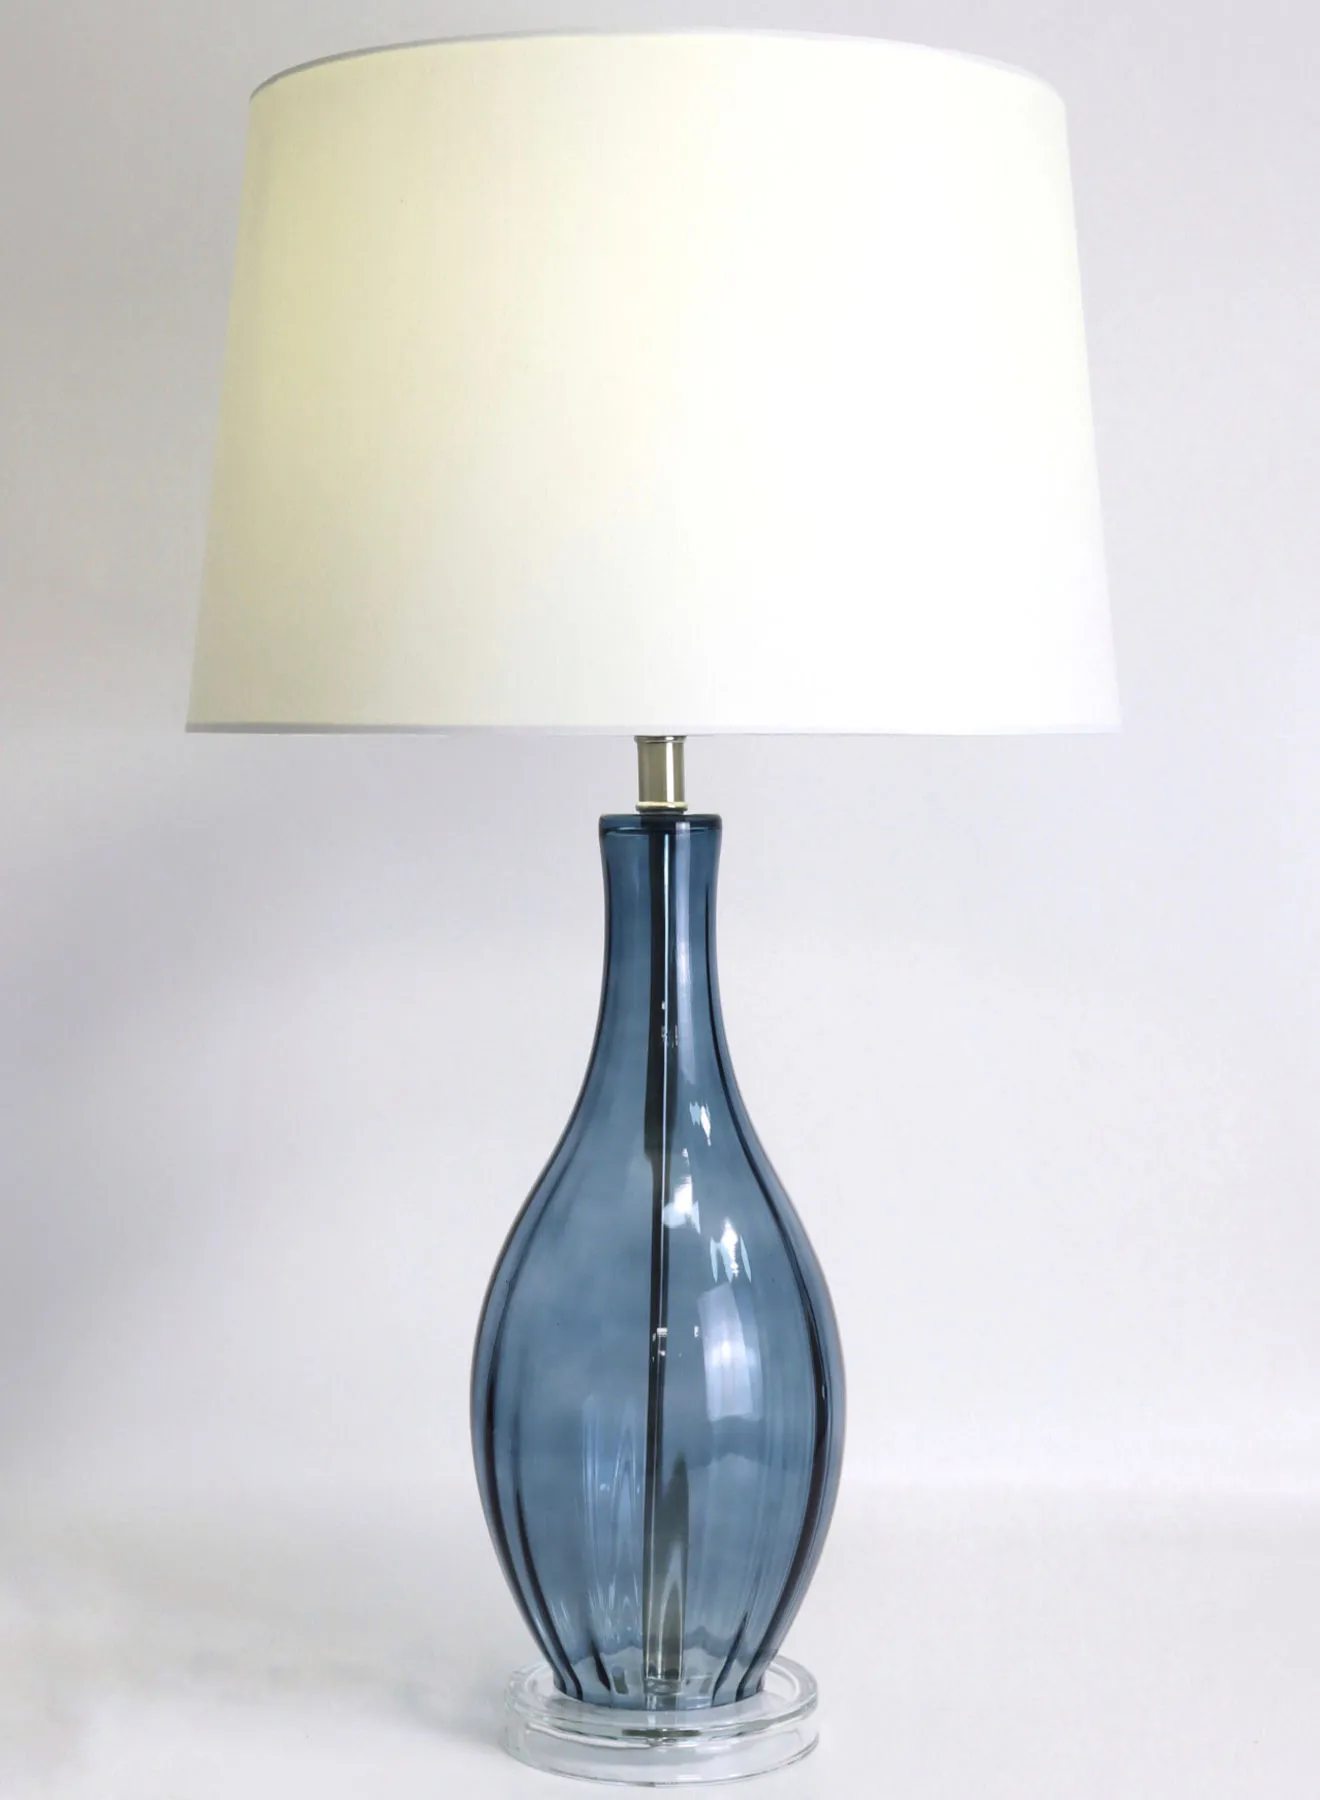 ebb & flow Modern Design Glass Table Lamp Unique Luxury Quality Material for the Perfect Stylish Home RSN71027 Blue 15 x 25.5